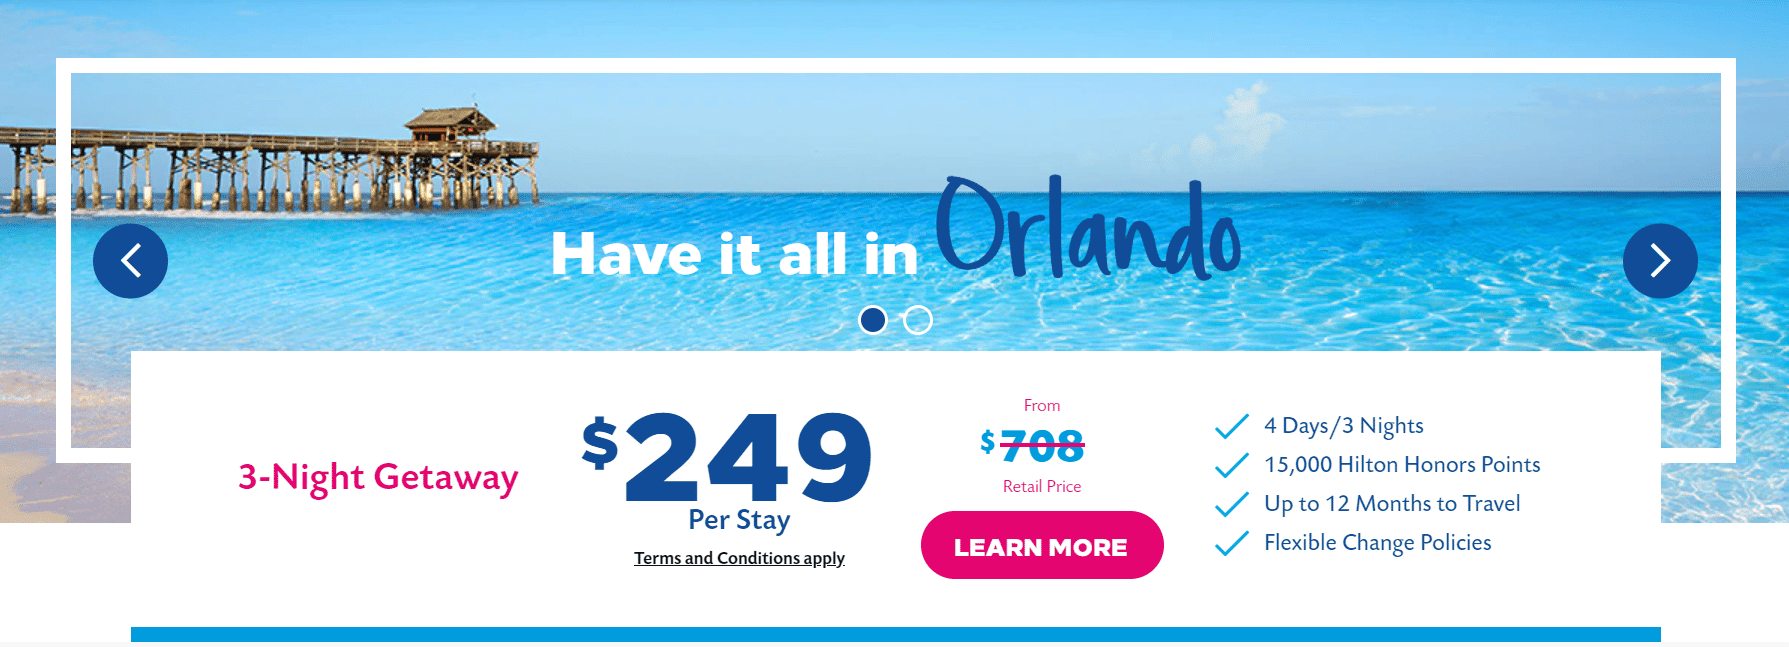 hilton grand vacations timeshare offer for orlando